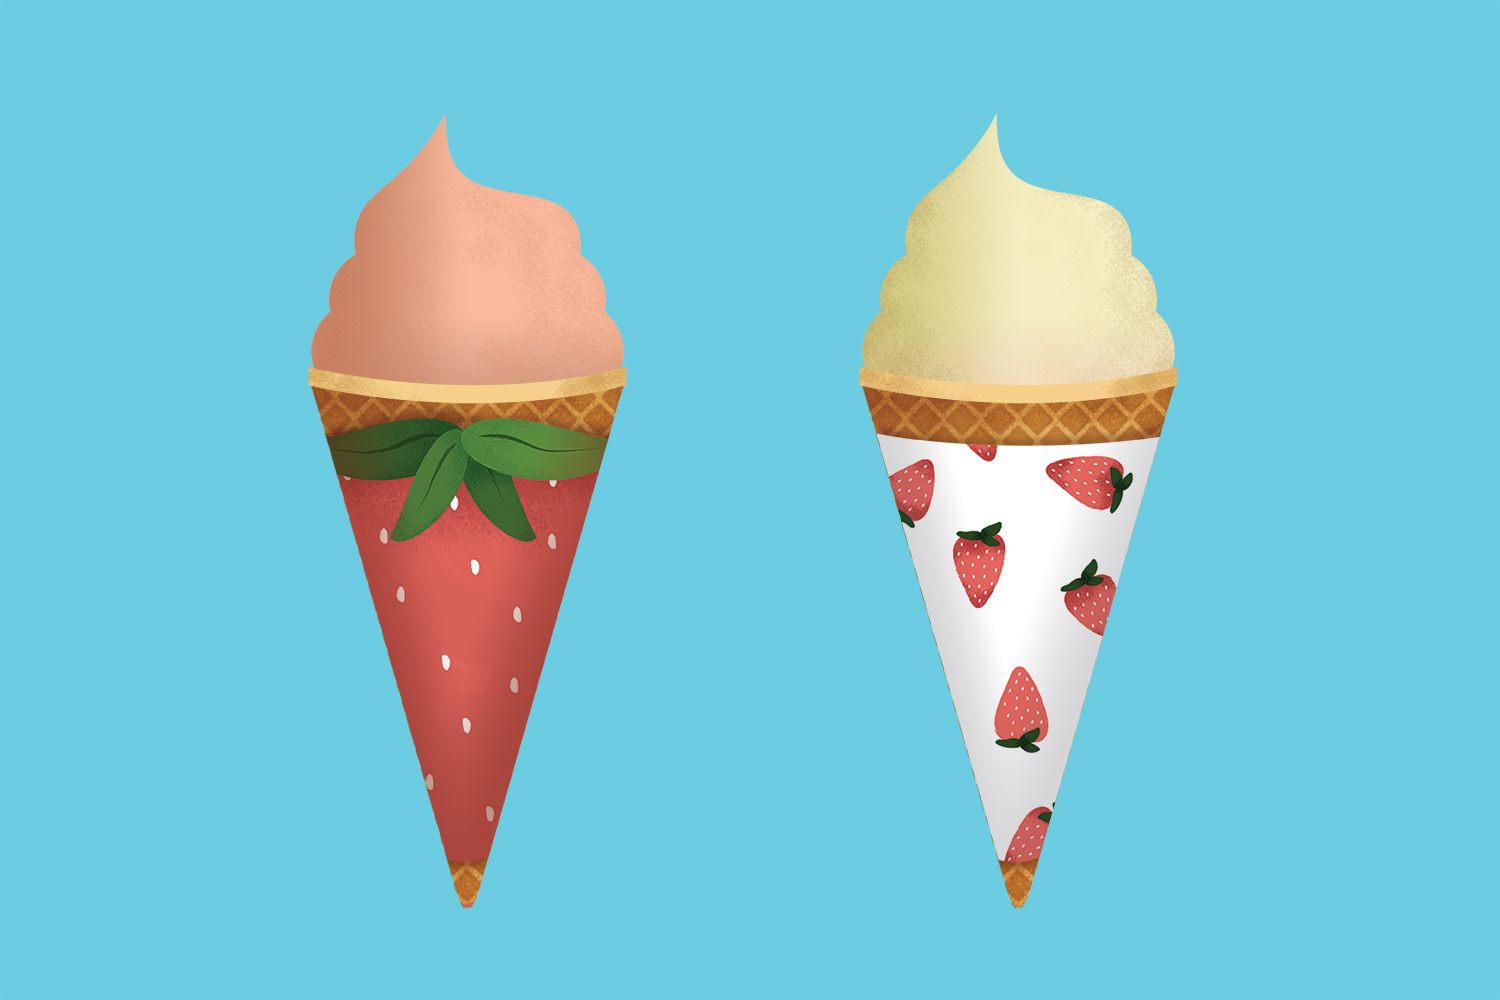 fruity ice cream cone wrappers on blue